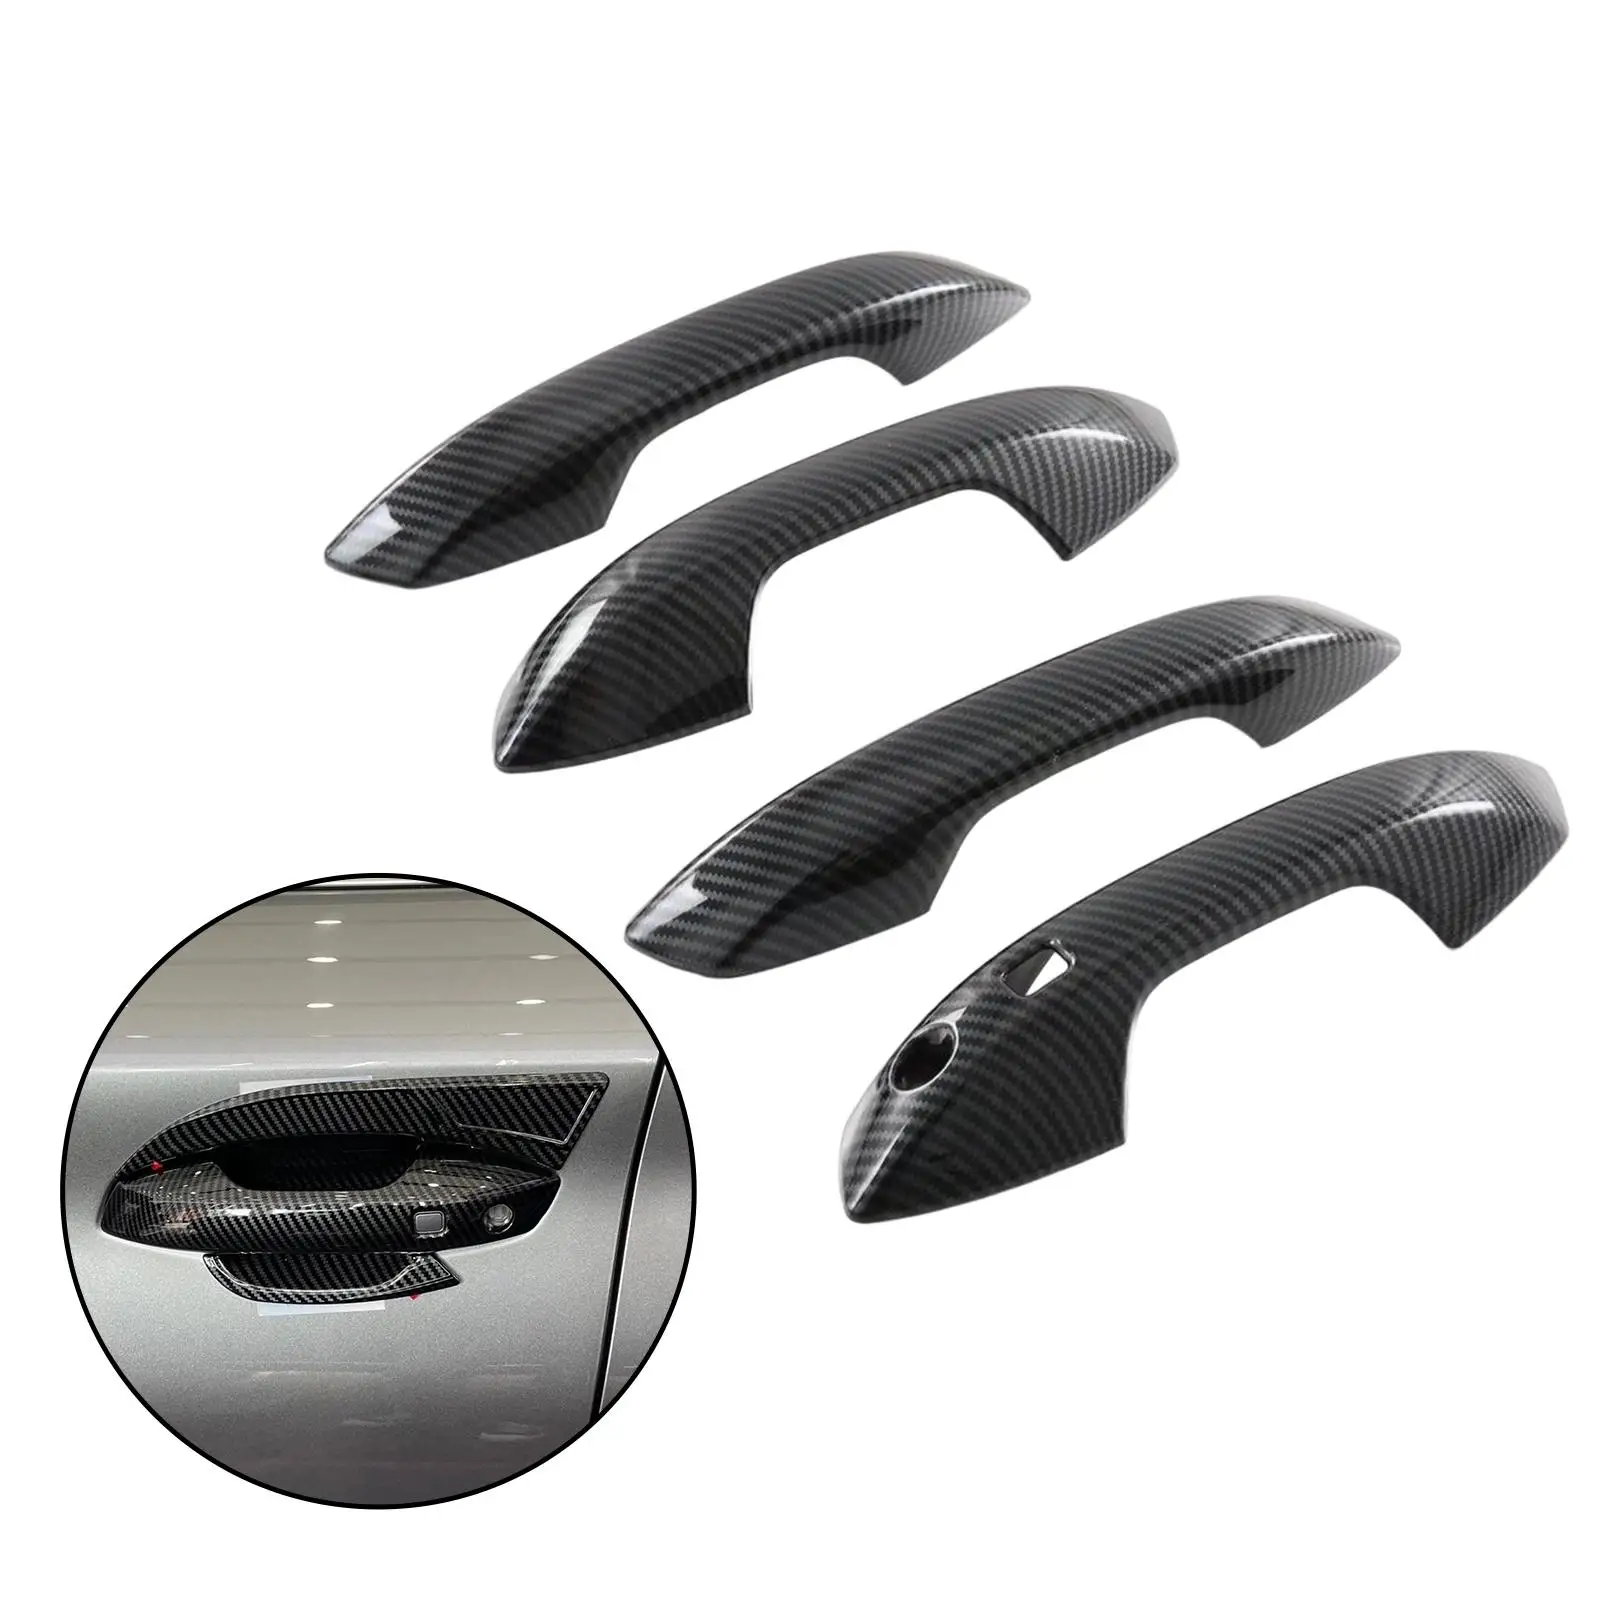 4 Pieces Car Door Handle Protective Cover Replacement Scratch Resistant Trim Parts Protector for Byd Atto 3 Yuan Plus